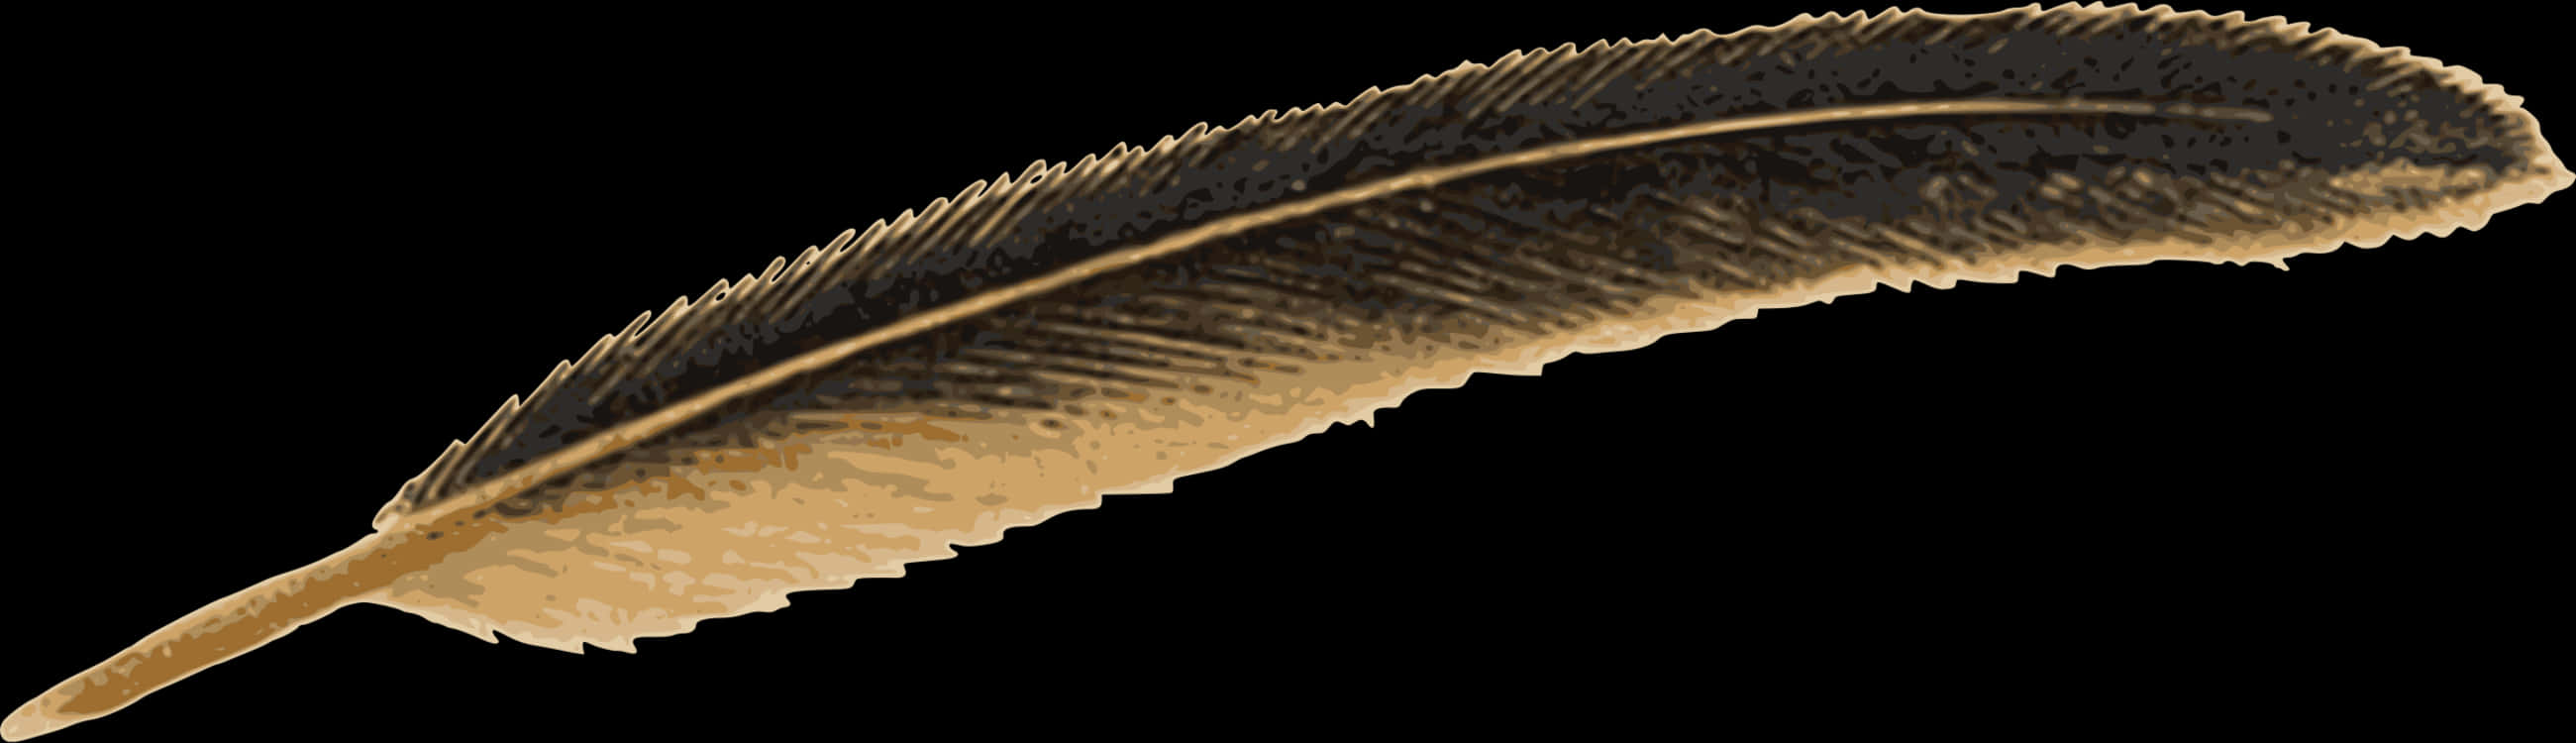 Feather Png